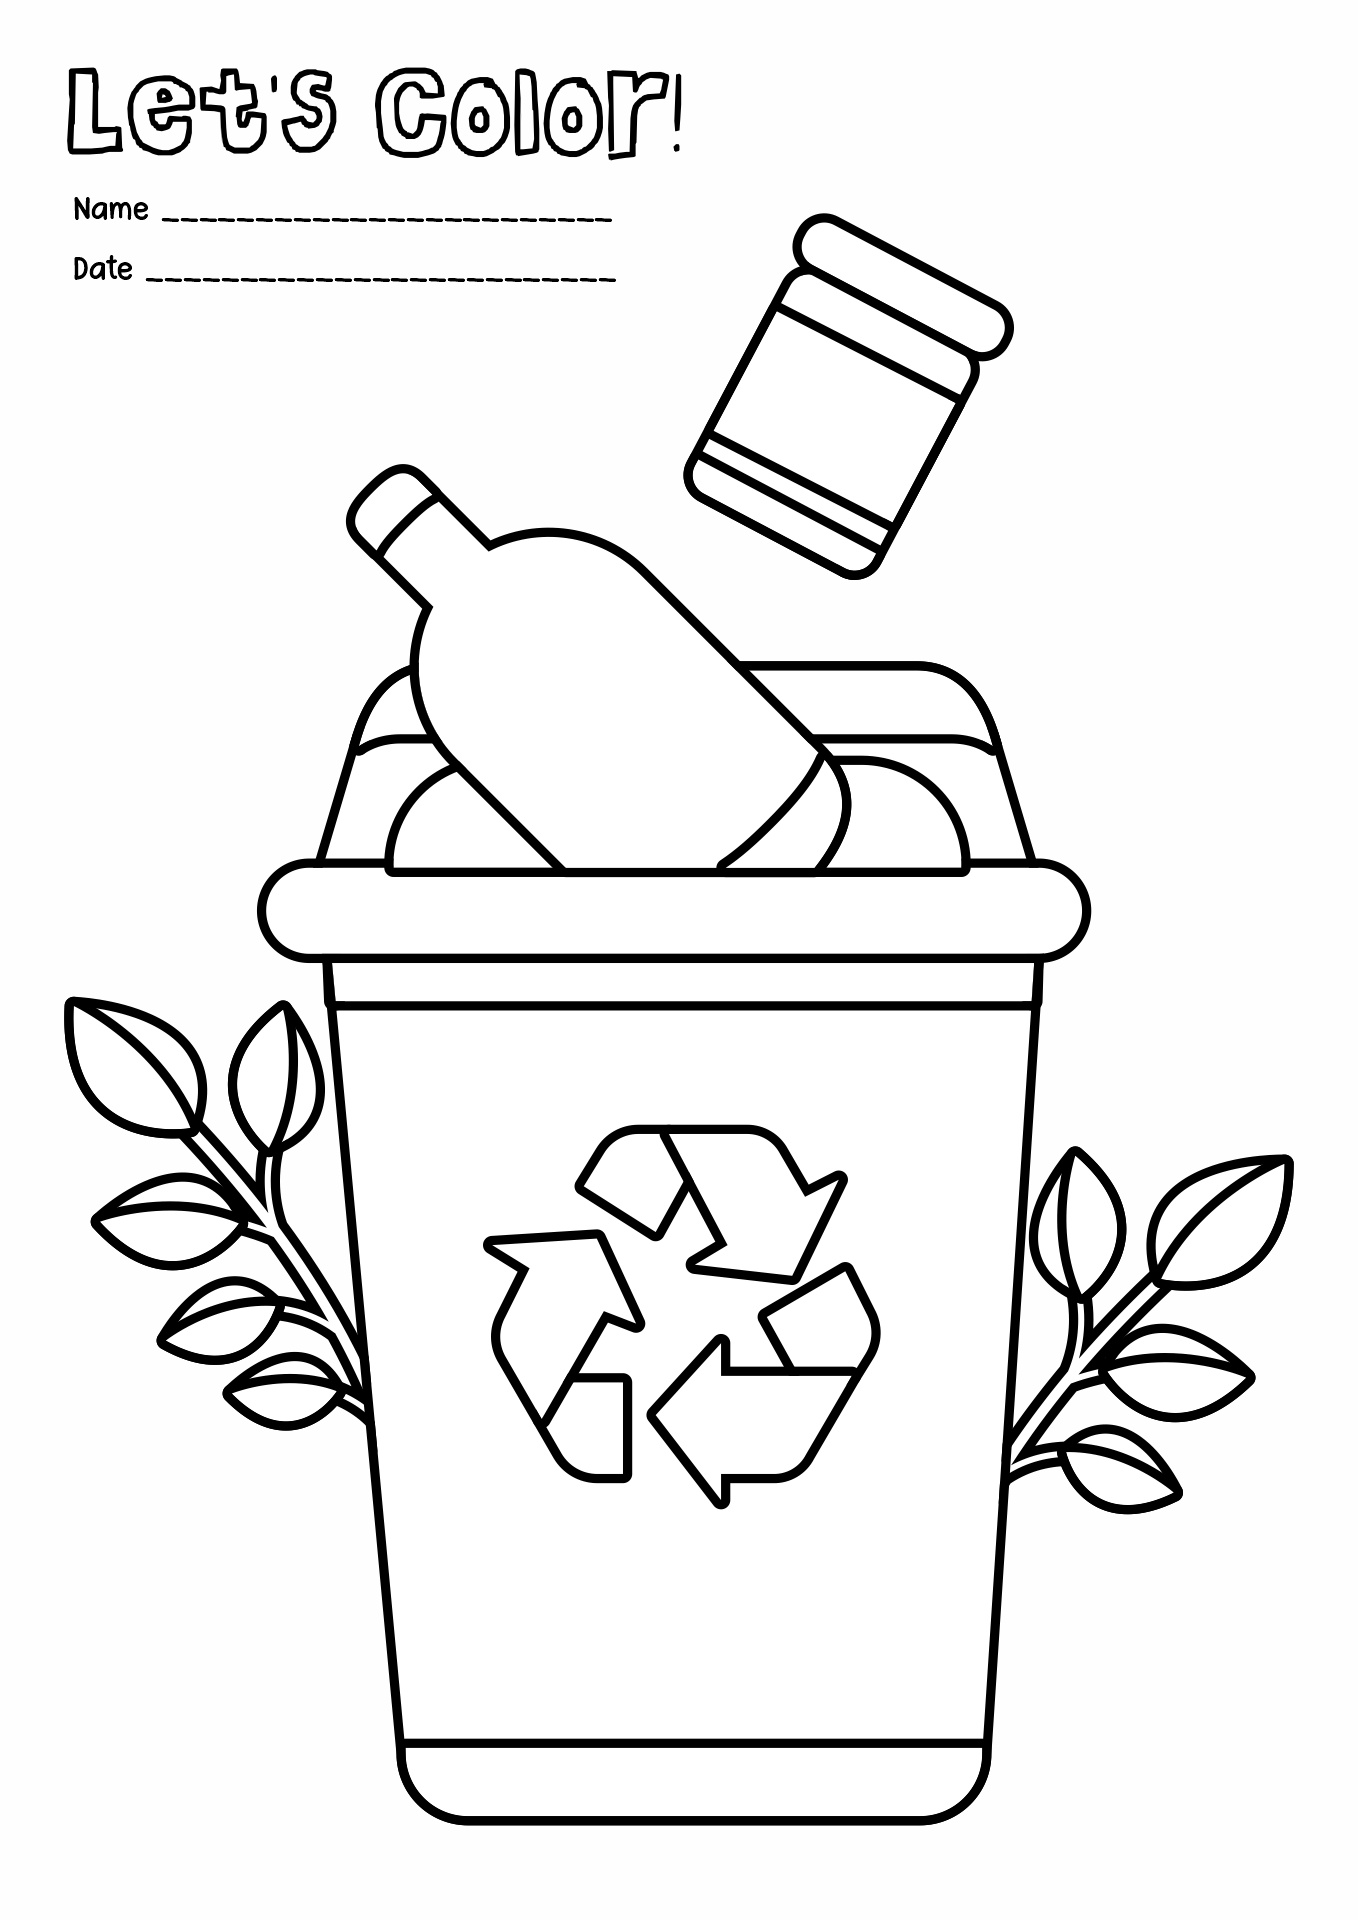 Recycling Fun Coloring Pages